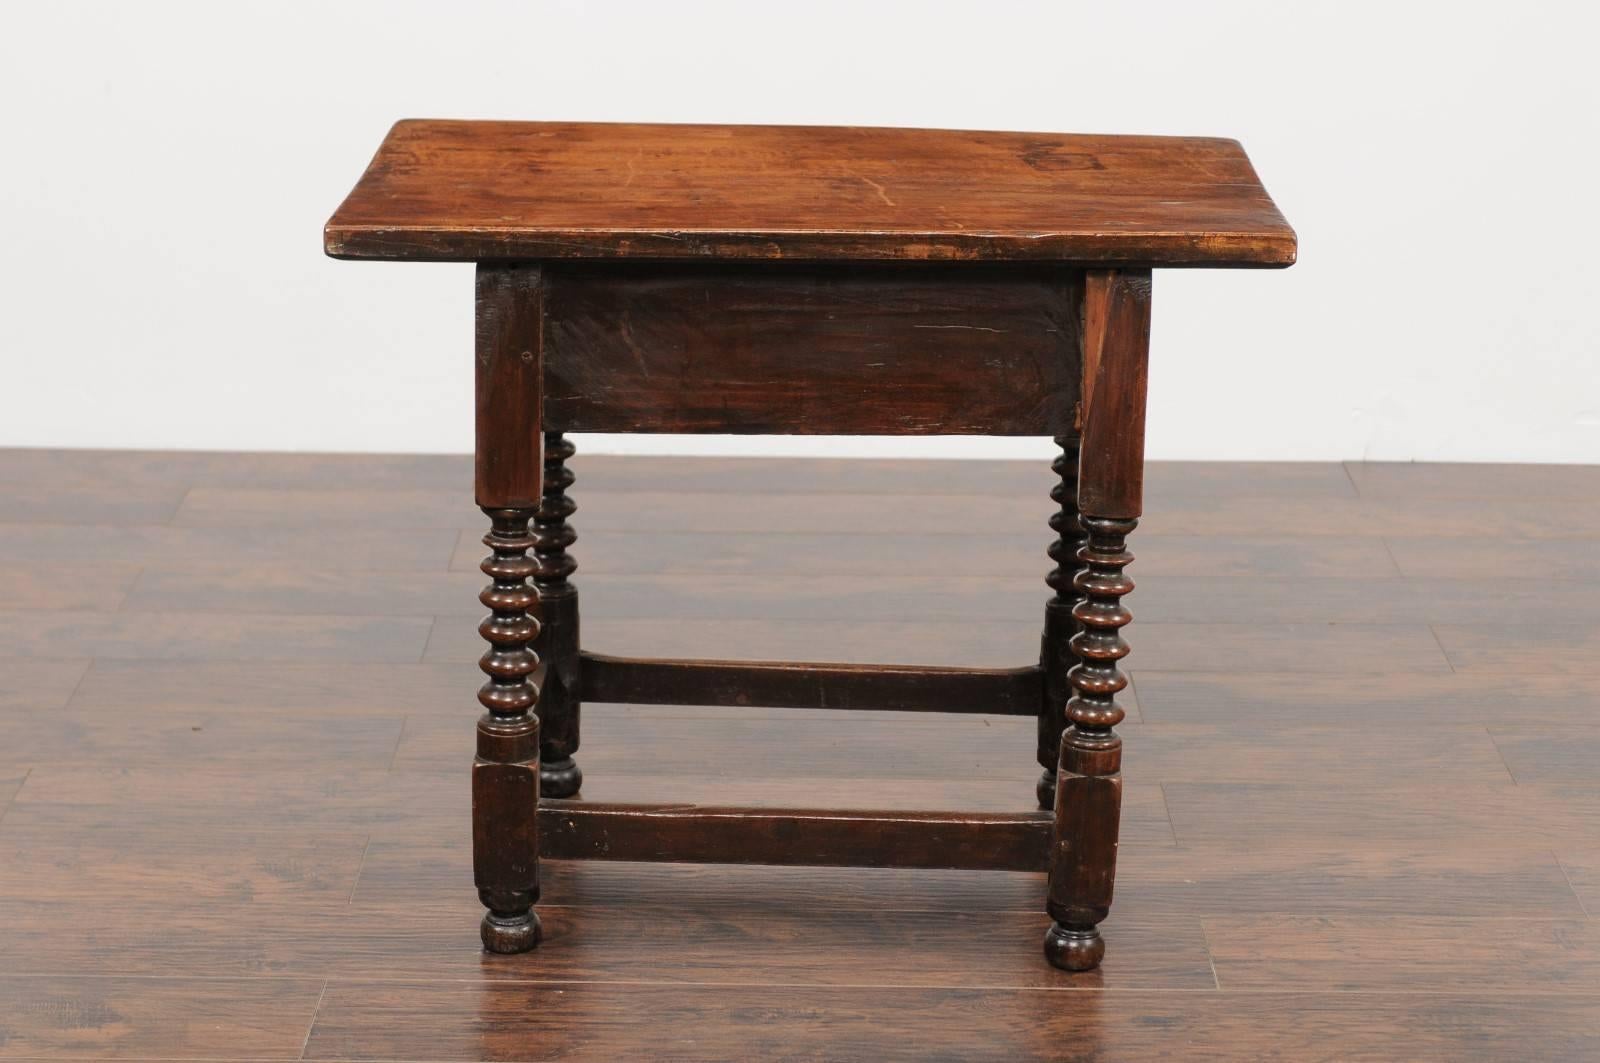 A Spanish walnut side table with single drawer, scalloped apron, turned legs and side stretcher from the late 18th century. This elegant Spanish table features a simple, rectangular top, sitting above a hand-cut dovetailed drawer, adorned with